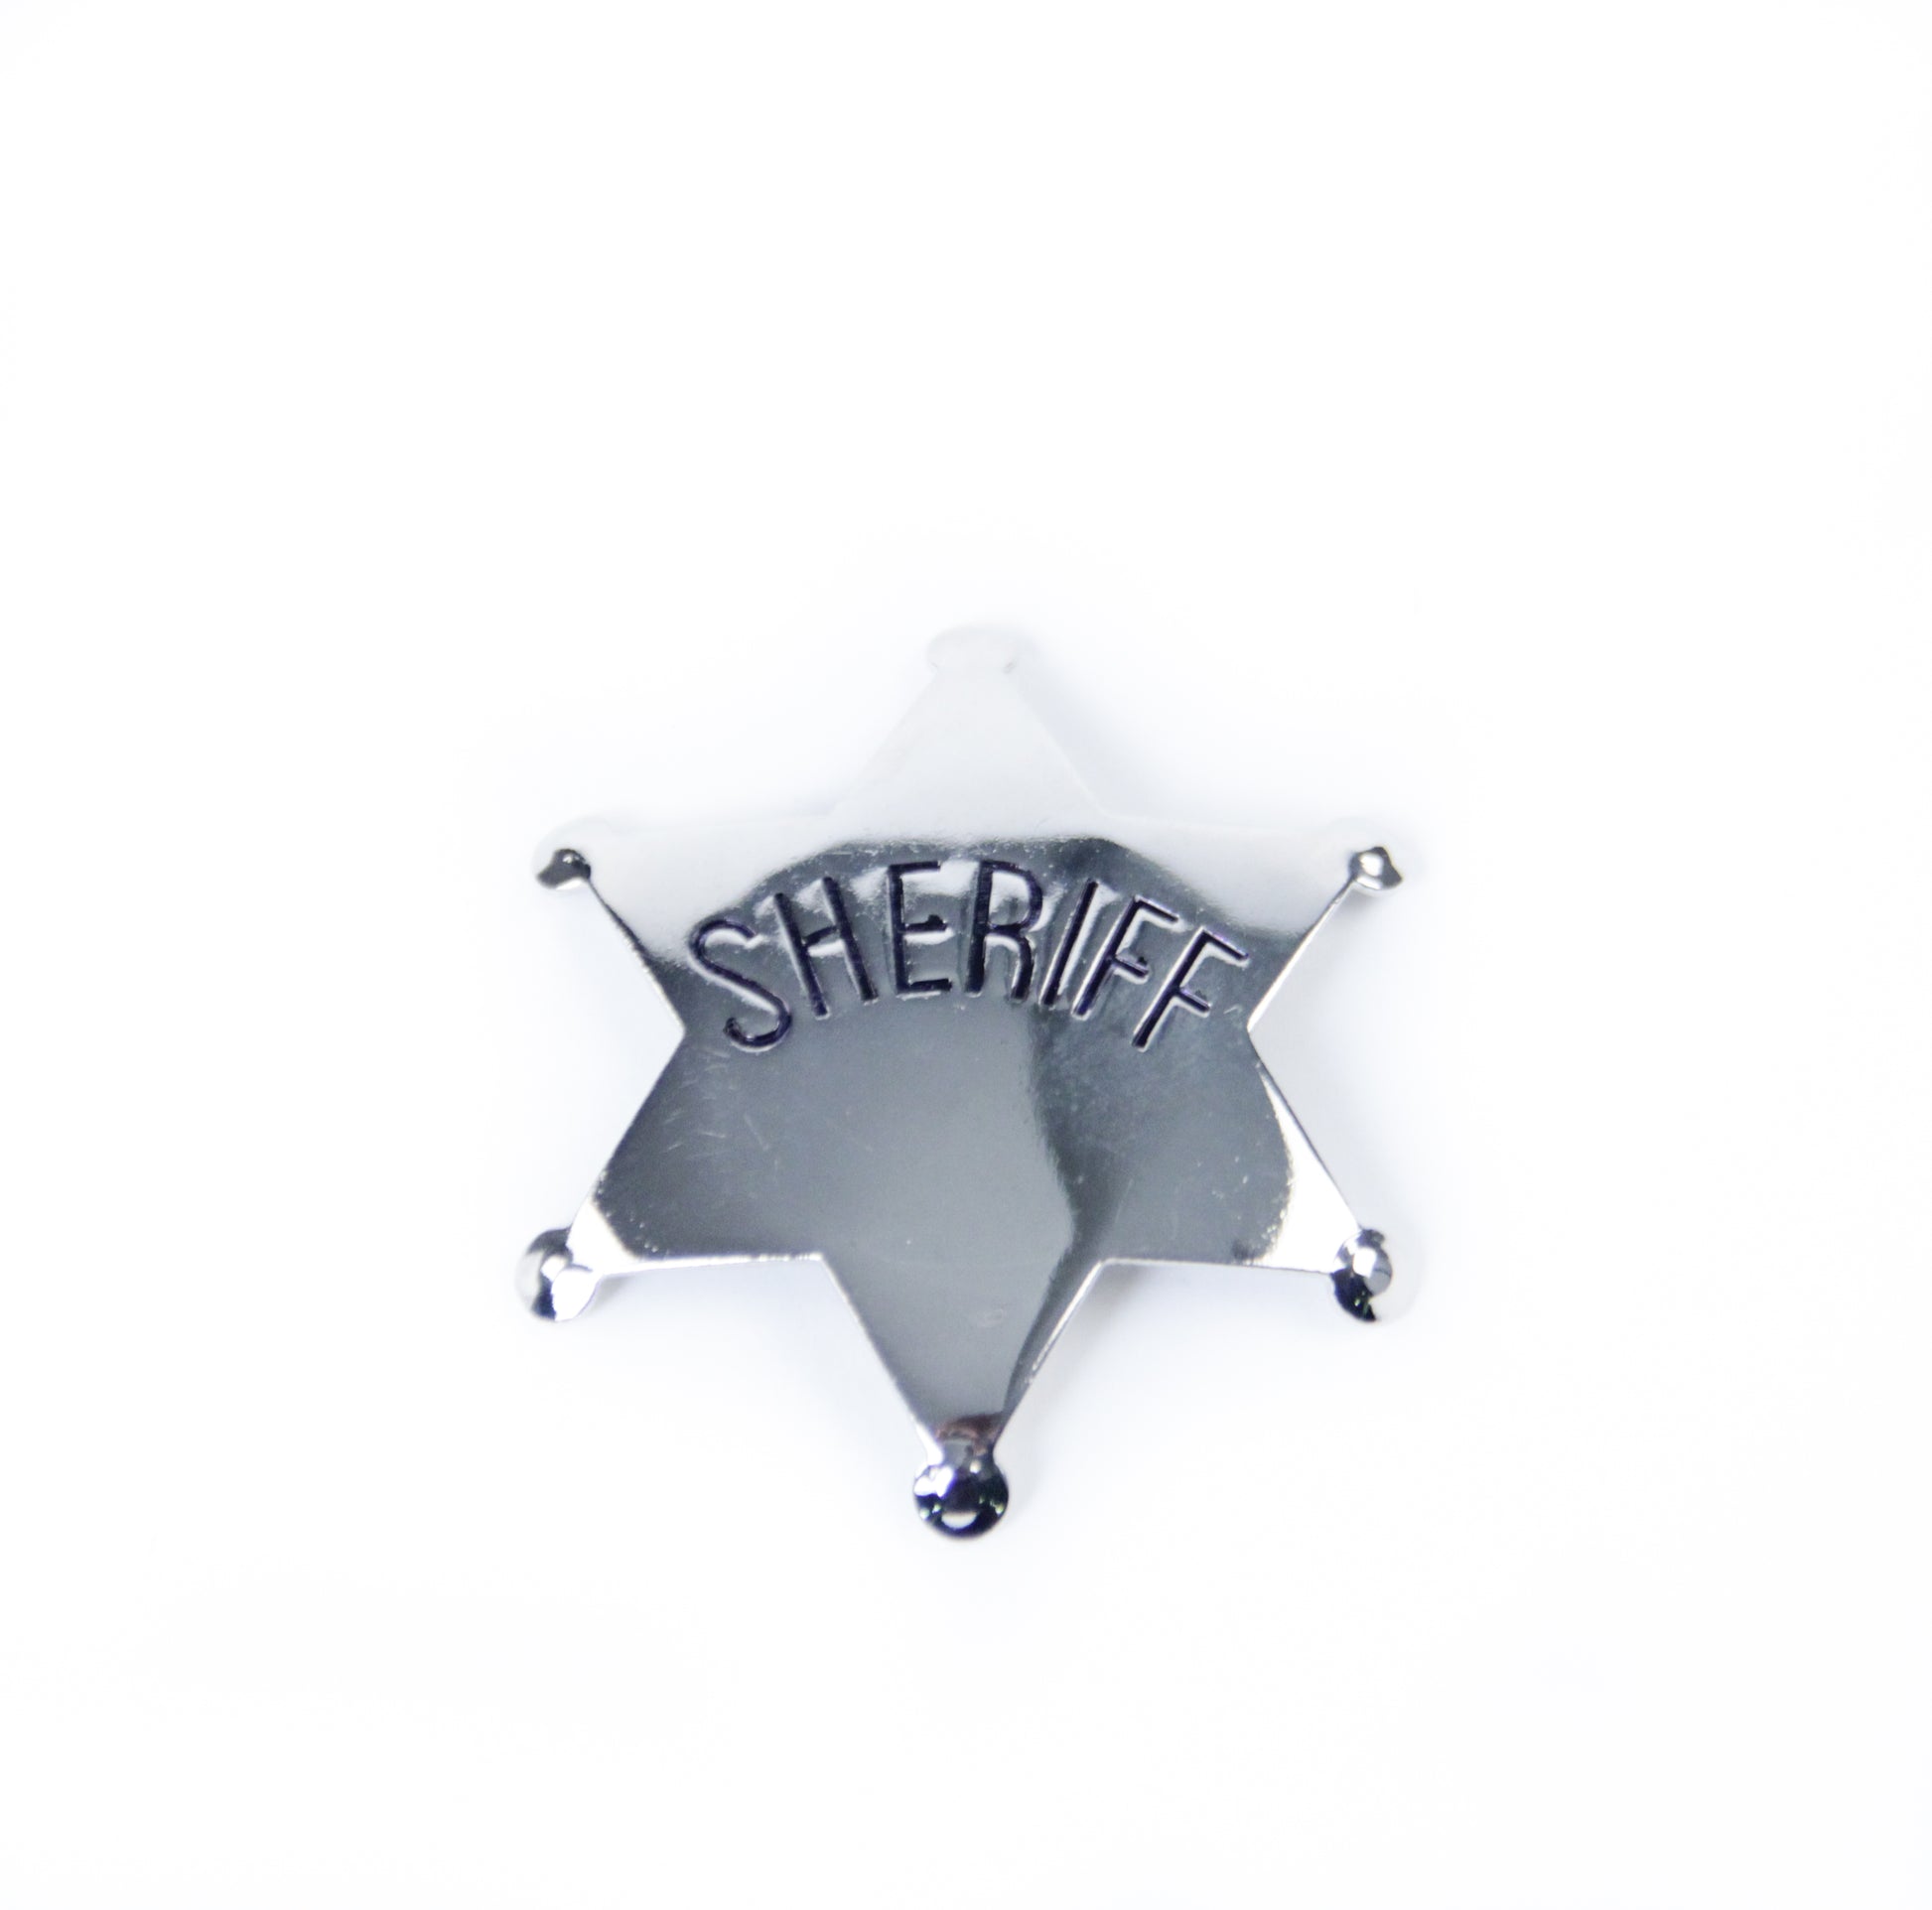 sheriff's badge from the old west toy costume dress up souvenir silver metal shiny Cowboy outfit